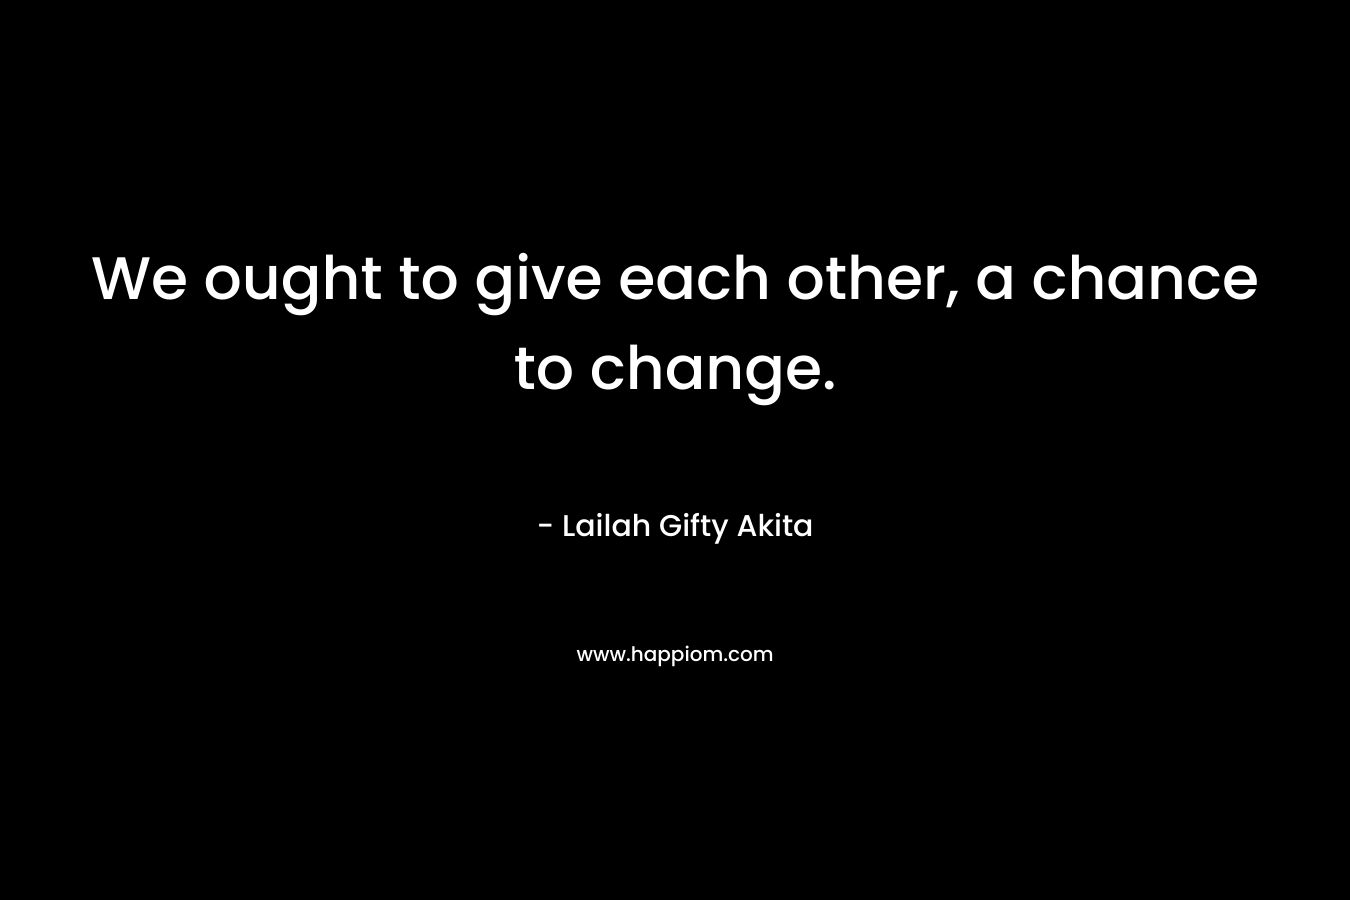 We ought to give each other, a chance to change.